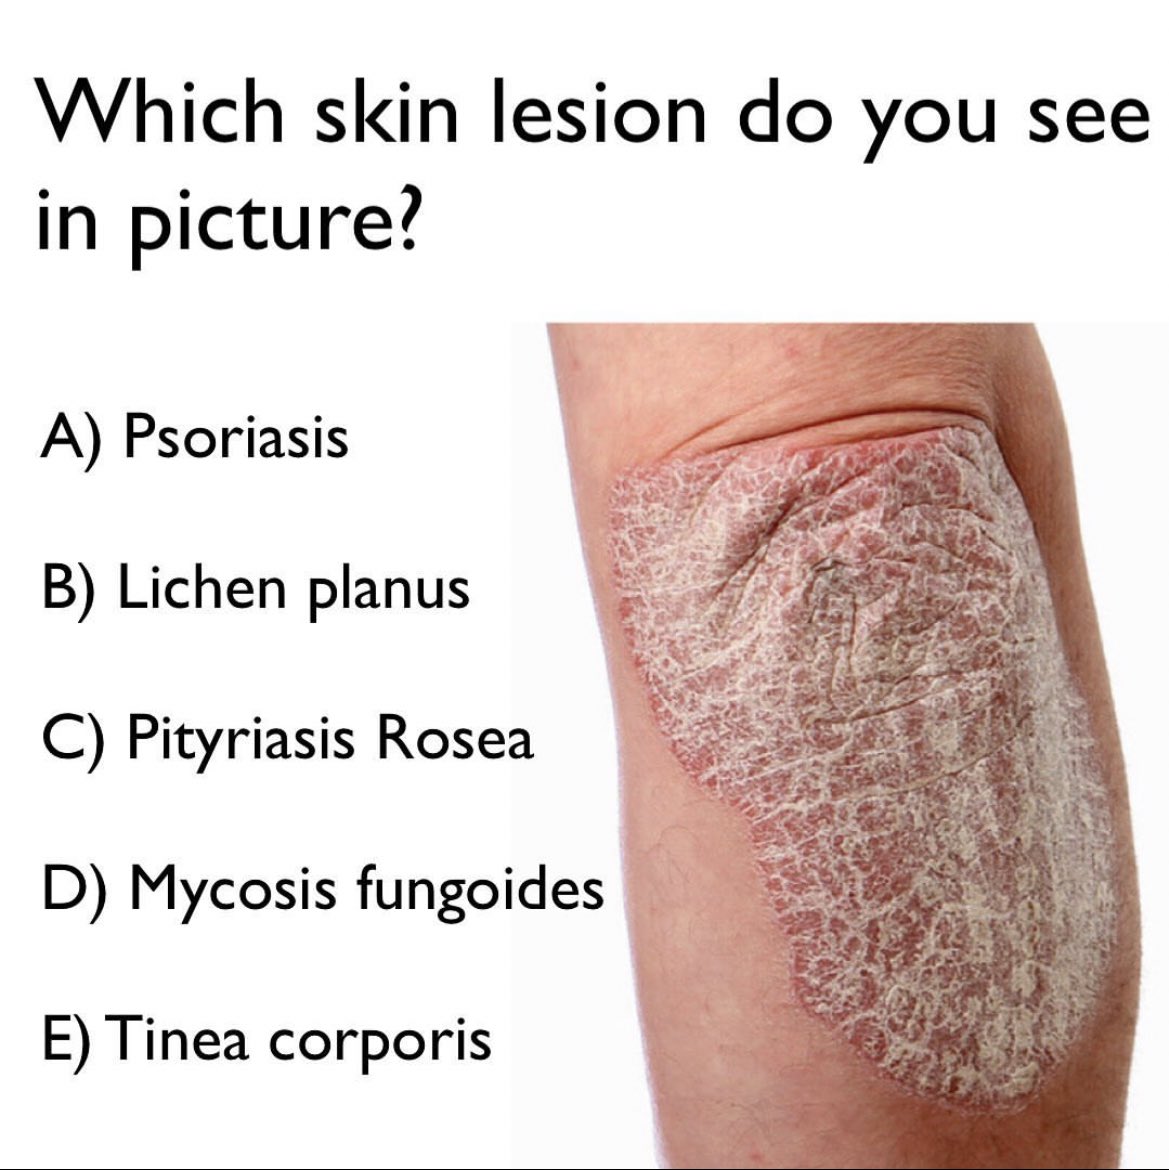 Which skin lesion do you see in picture? Comment your answer